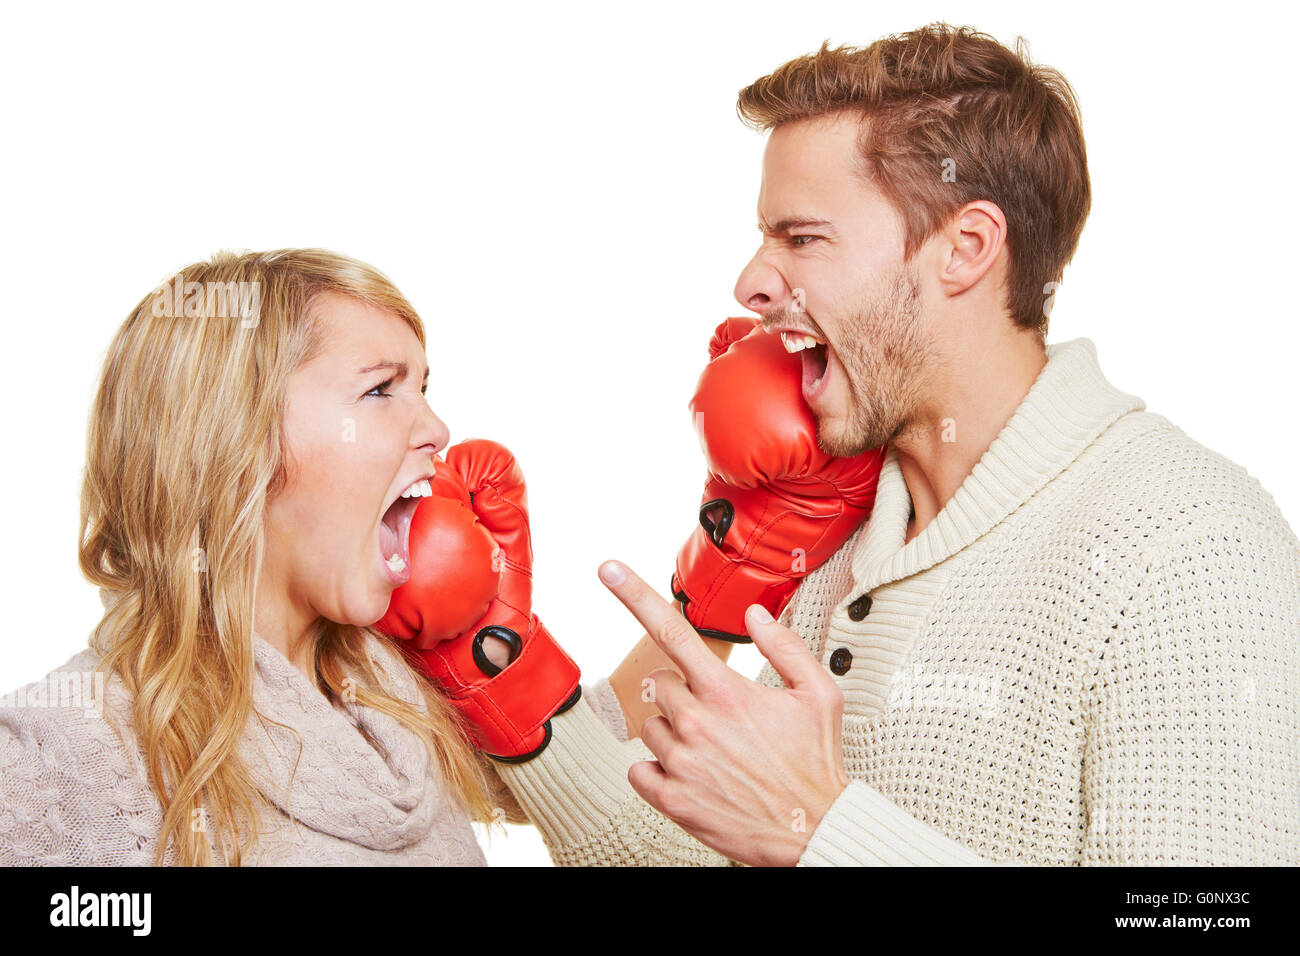 Screaming angry couple fighting with red boxing gloves Stock Photo